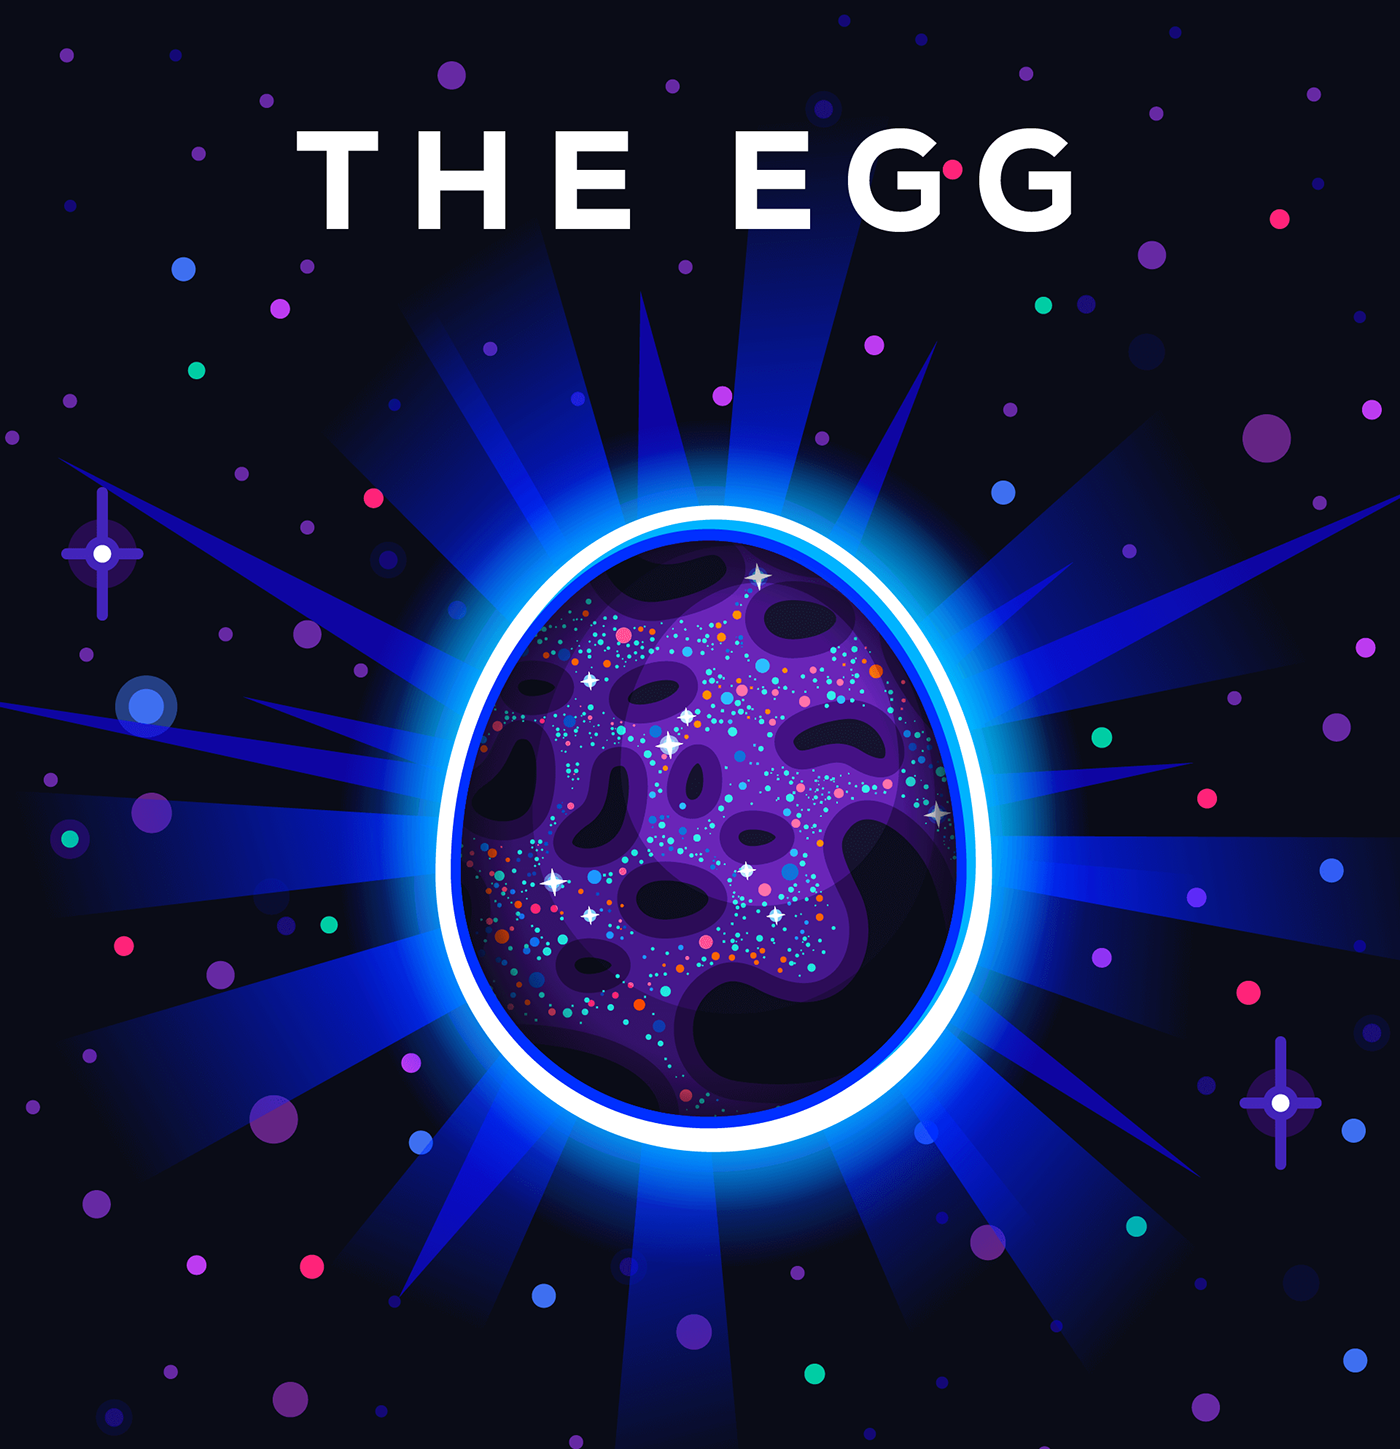 404 error page deisgn example #395: The Egg - A Short Story